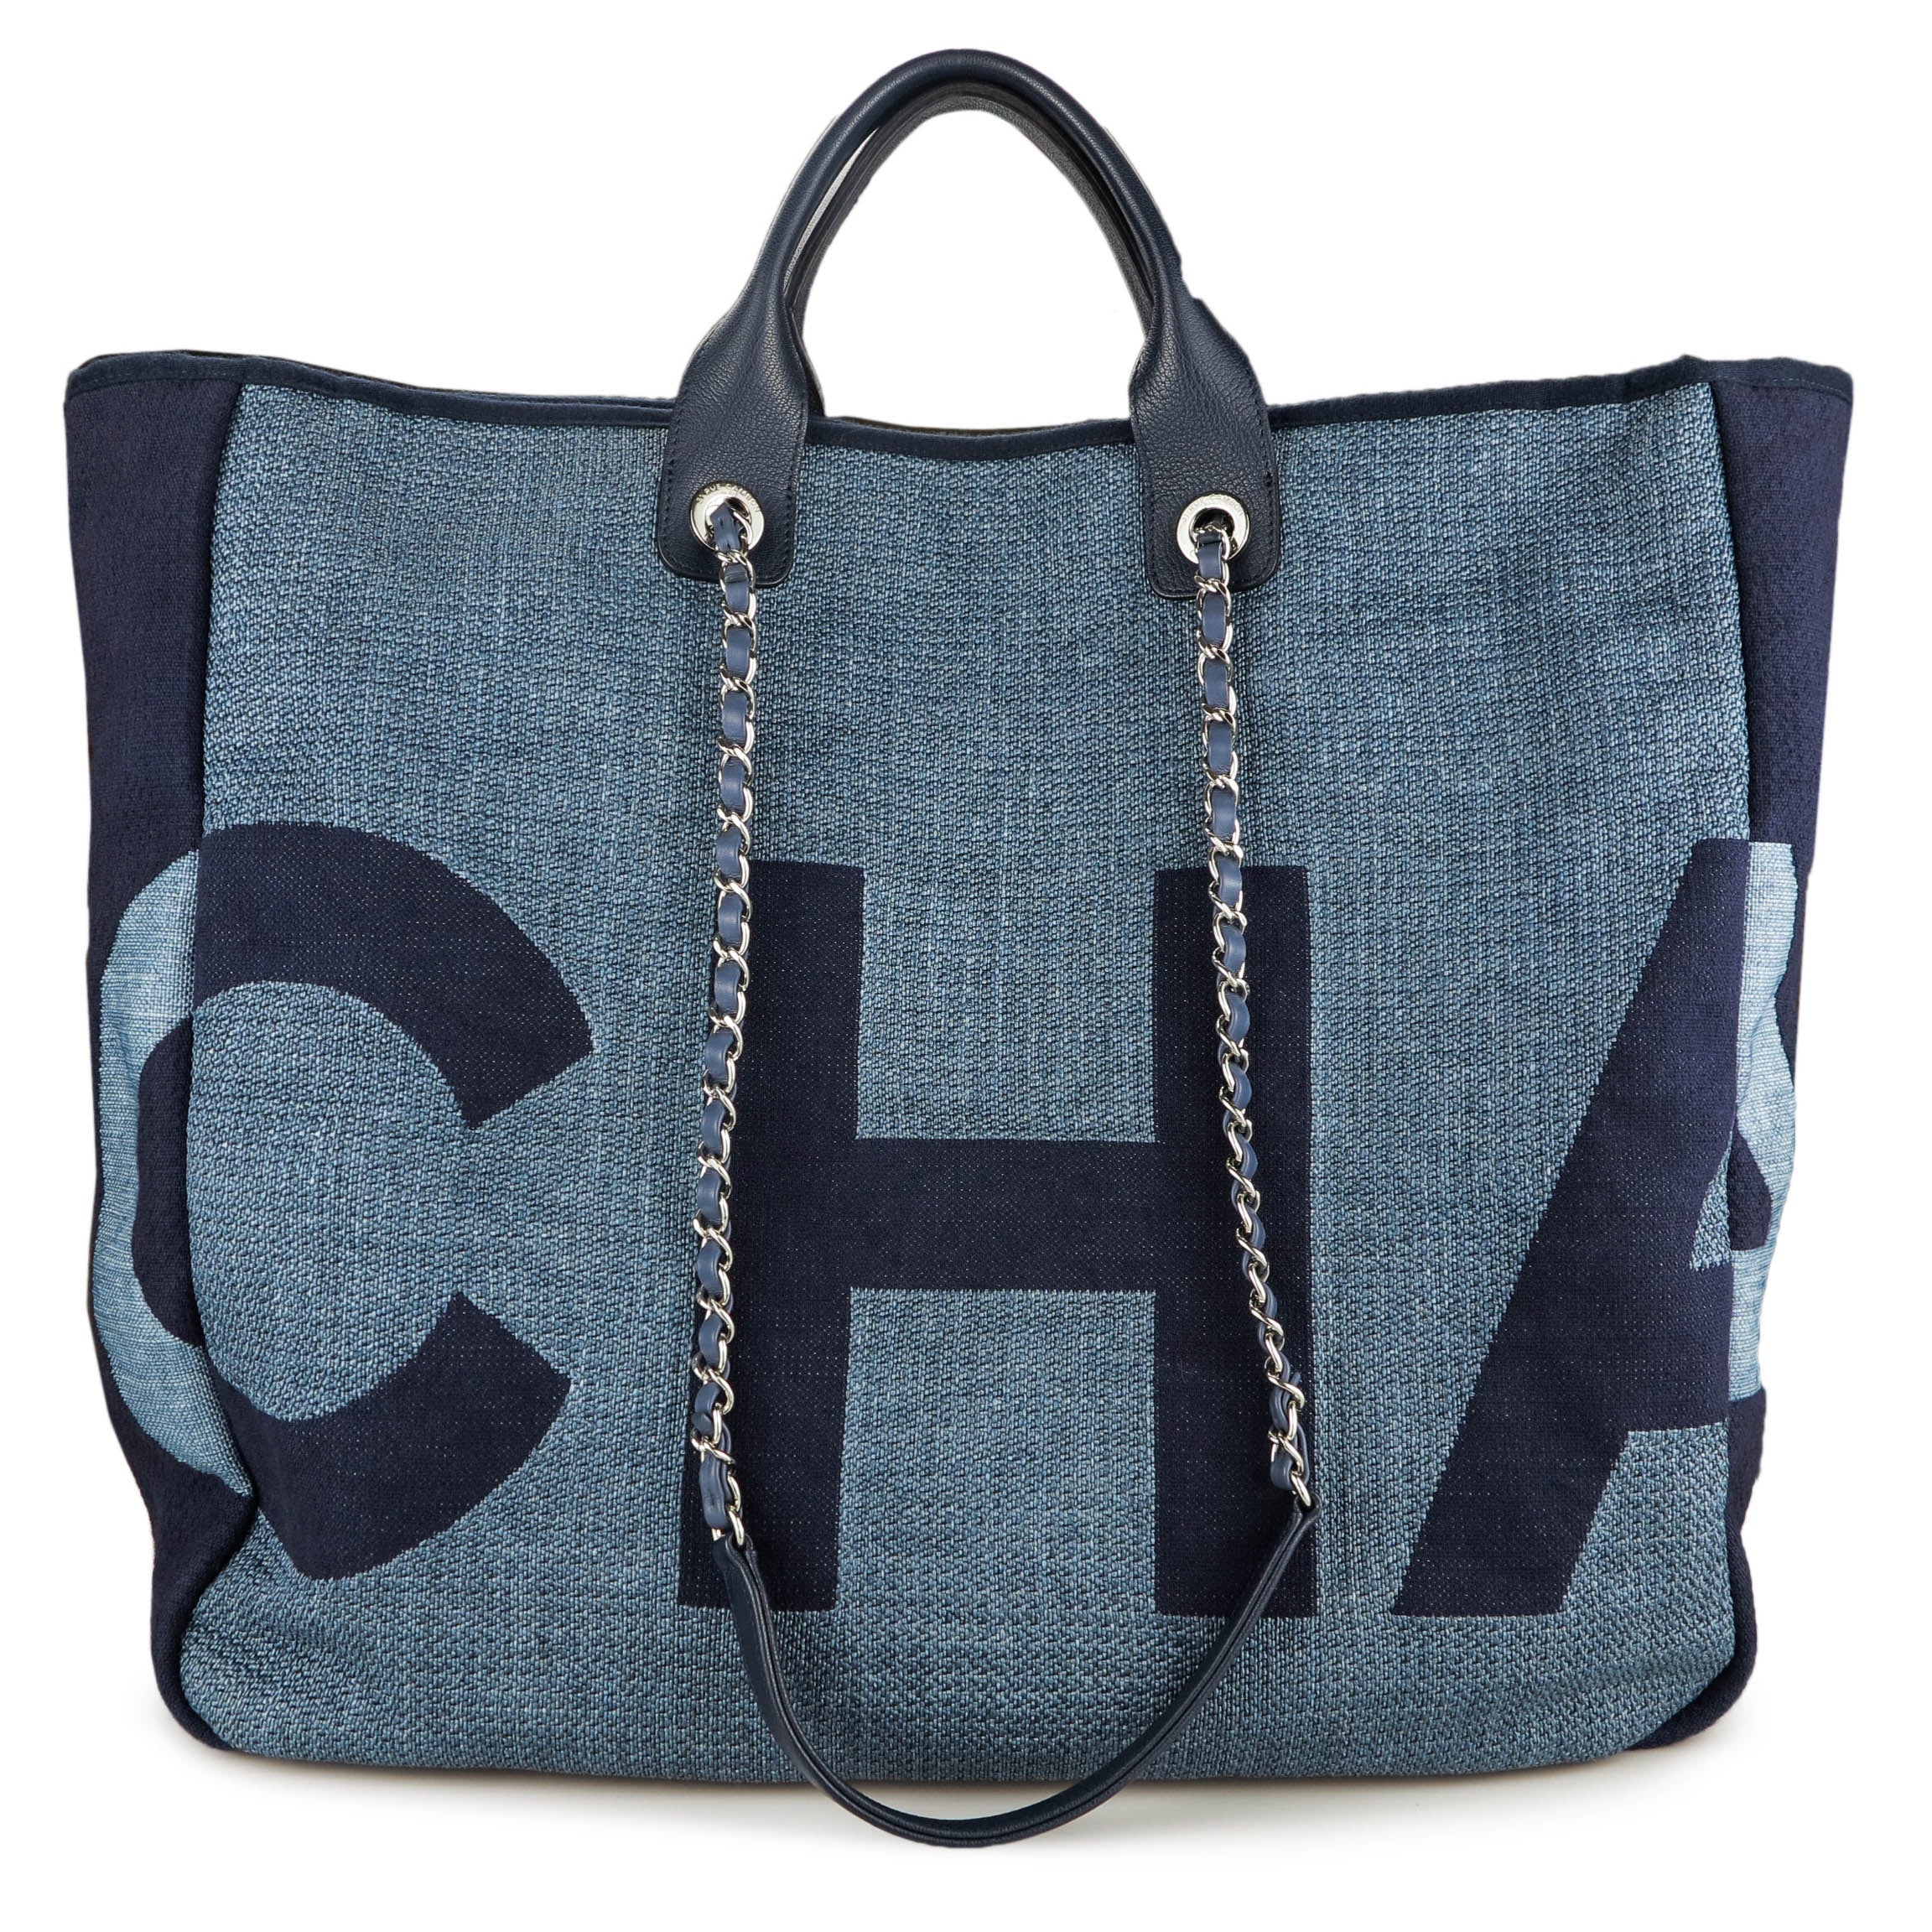 Chanel Blue Canvas Airlines Zip Shopping Tote Large Q6B49G0EB5000